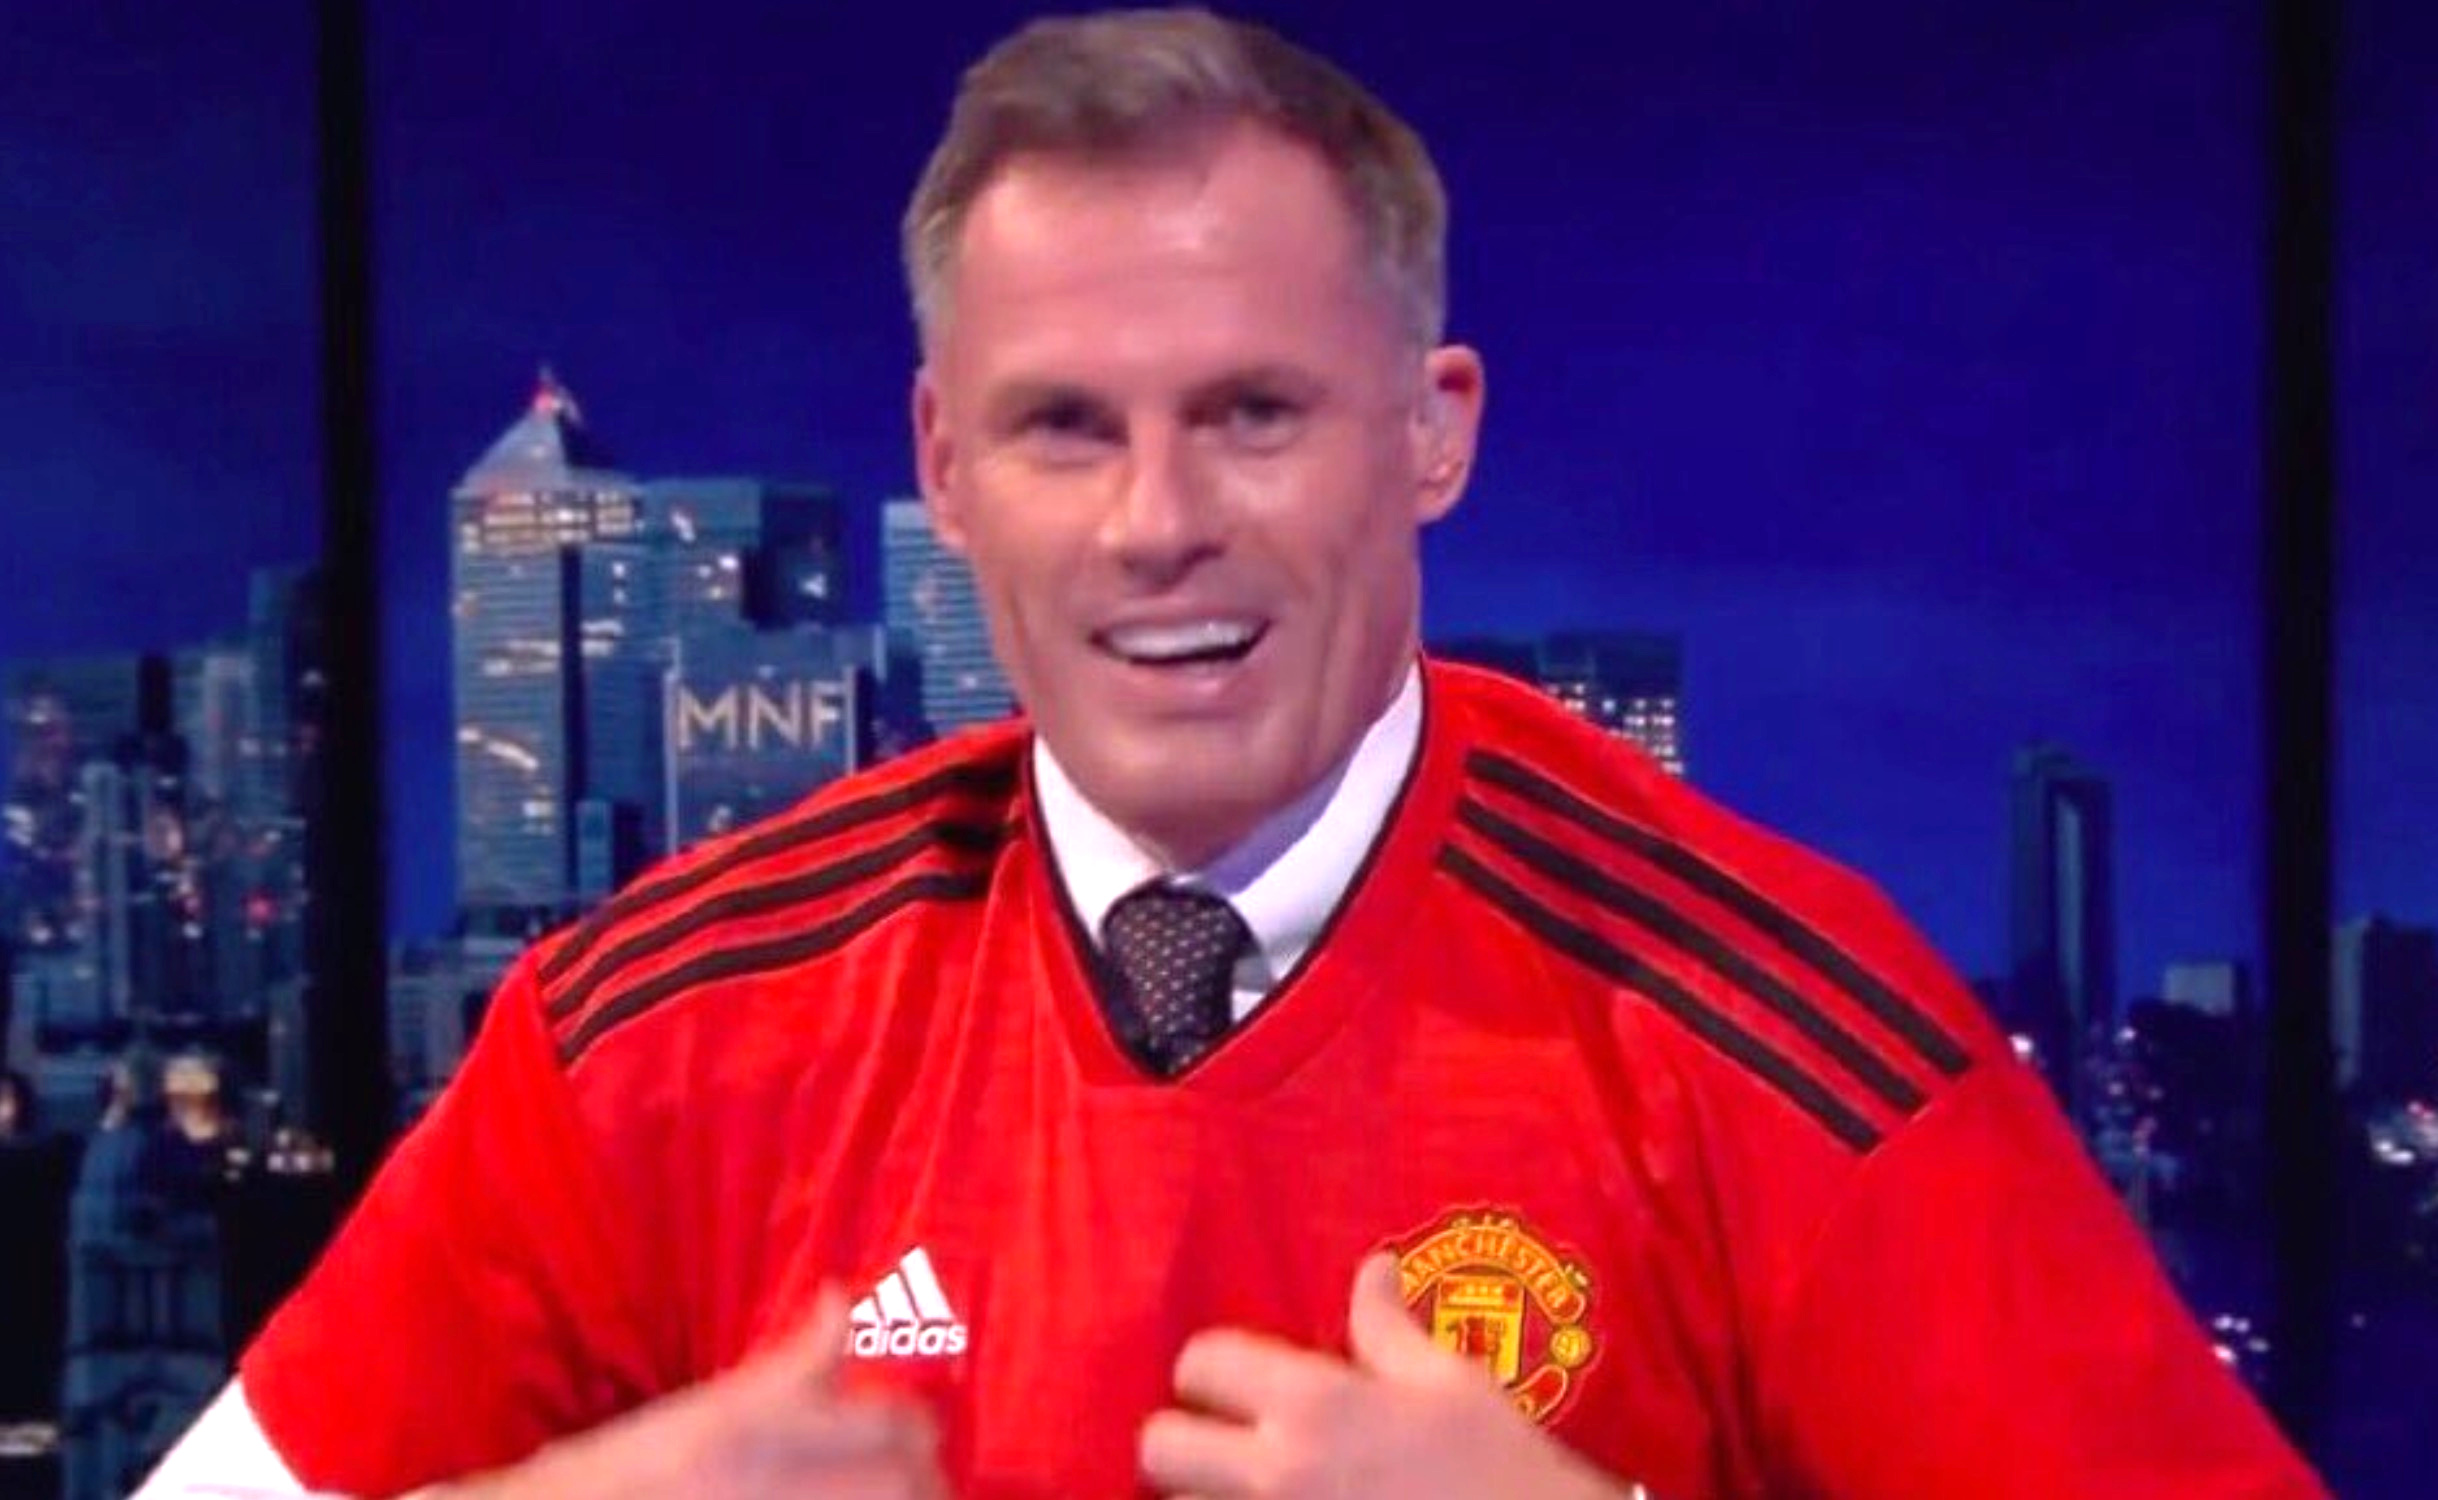 Hilarious TV promo nails the plight of Liverpool fans ahead of the Manchester derby